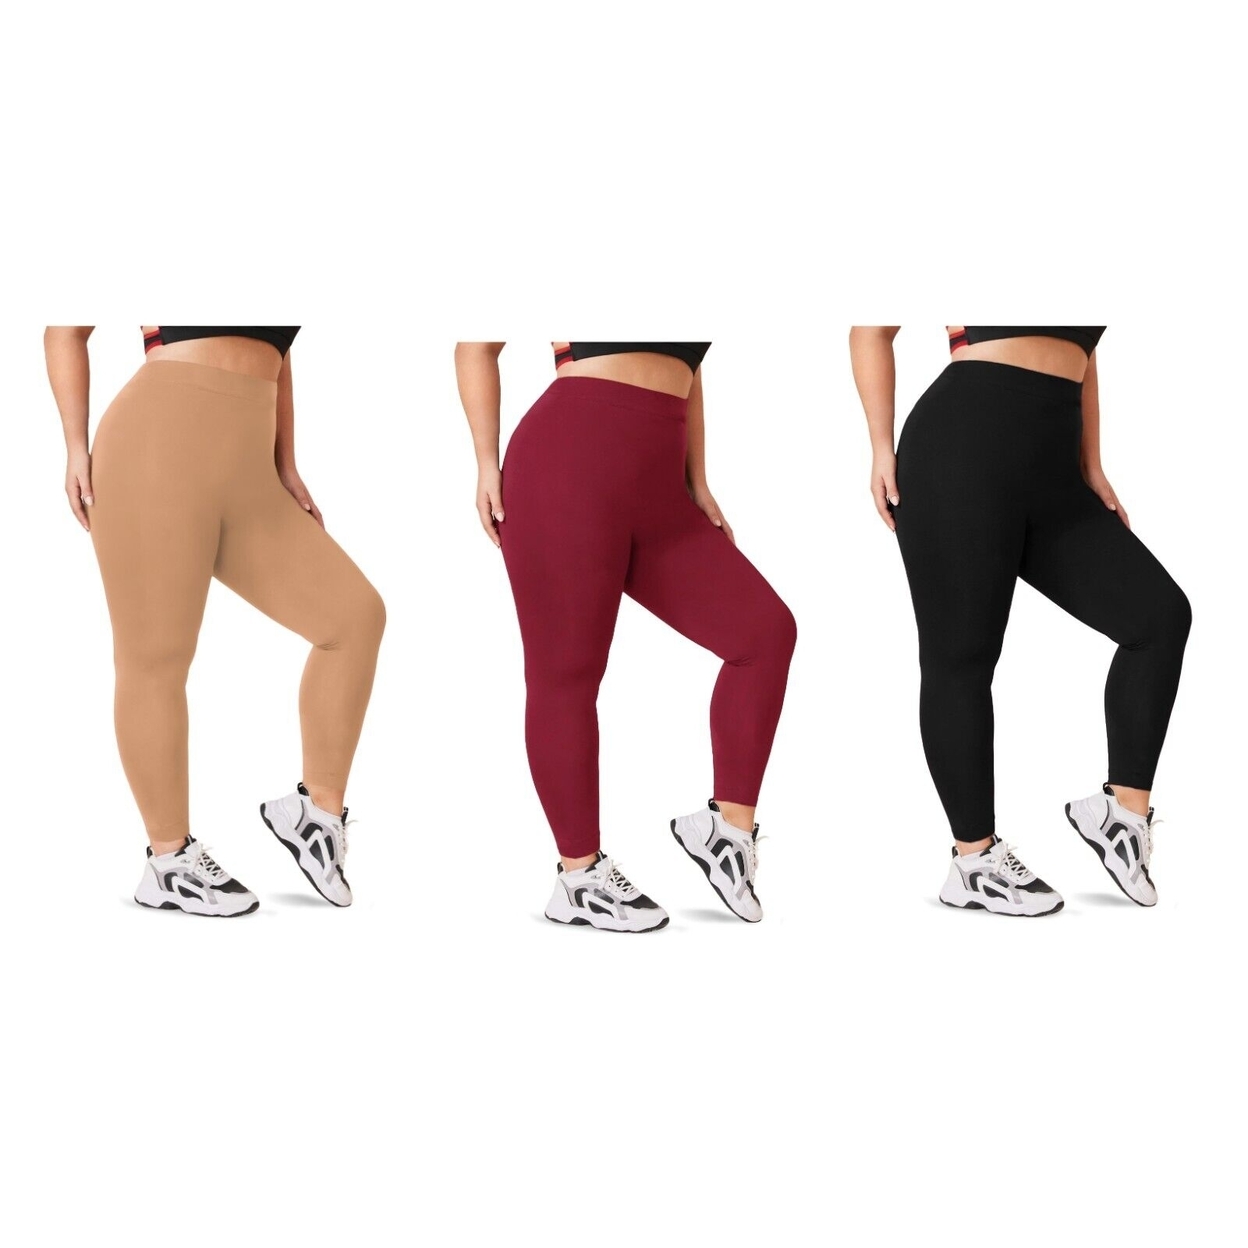 2-Pack: Women's Casual Ultra-Soft Smooth High Waisted Athletic Active Yoga Leggings Plus Size Available - Red & Black, 3x